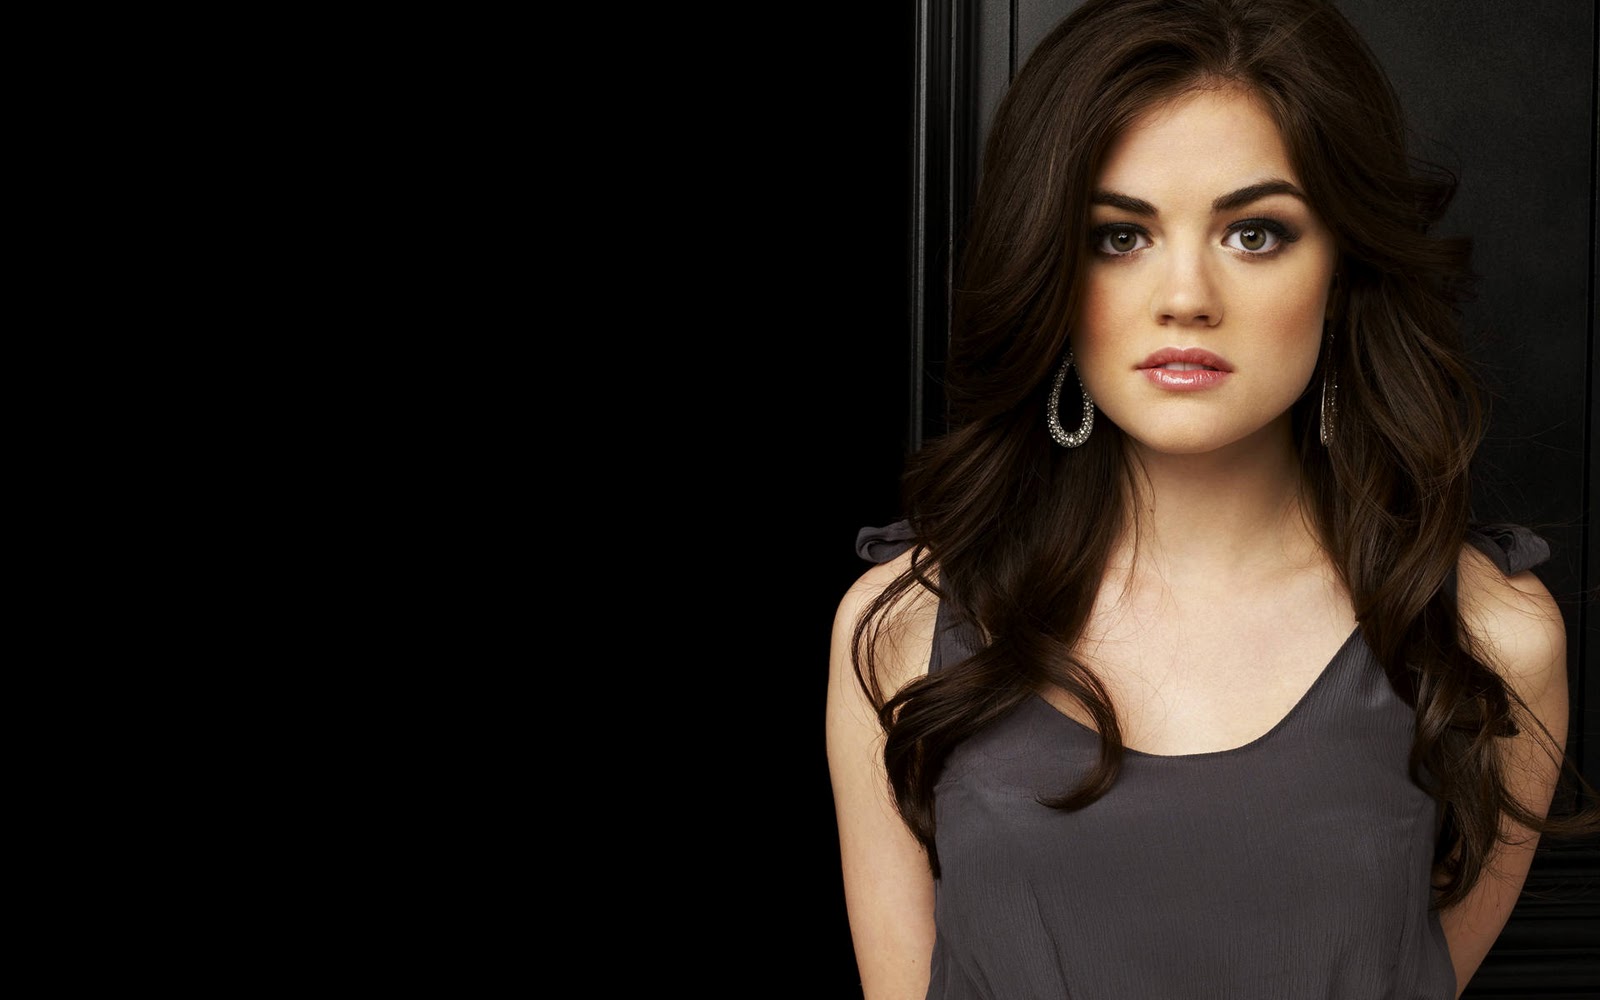 The Hot, Cute, Wonder full, And Charming Hollywood Actress Lucy Hale. 